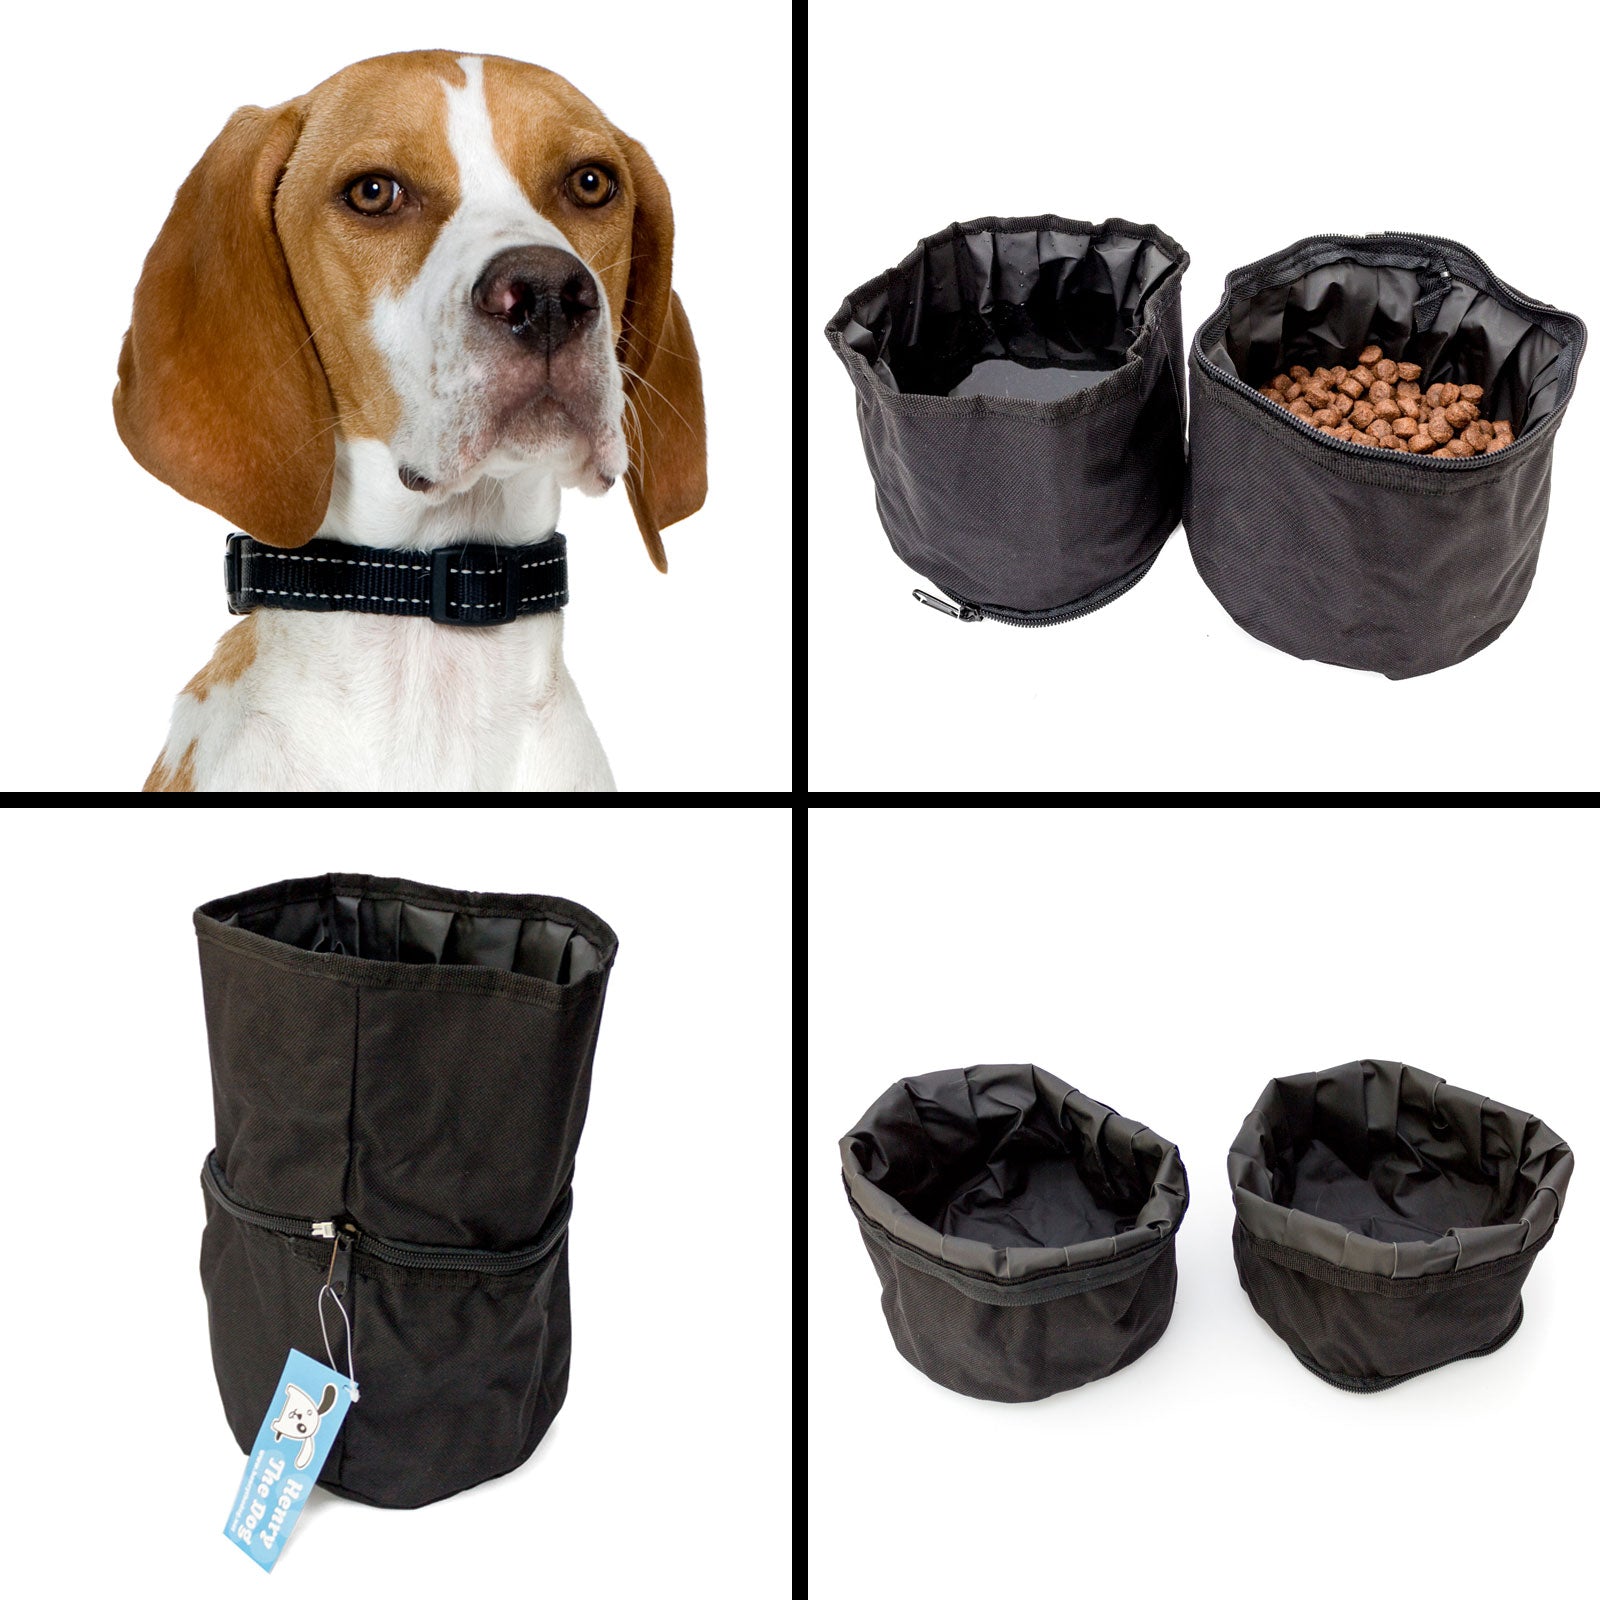 ENGLISH POINTER - Double Portable Travel Dog Bowl - Food And Water